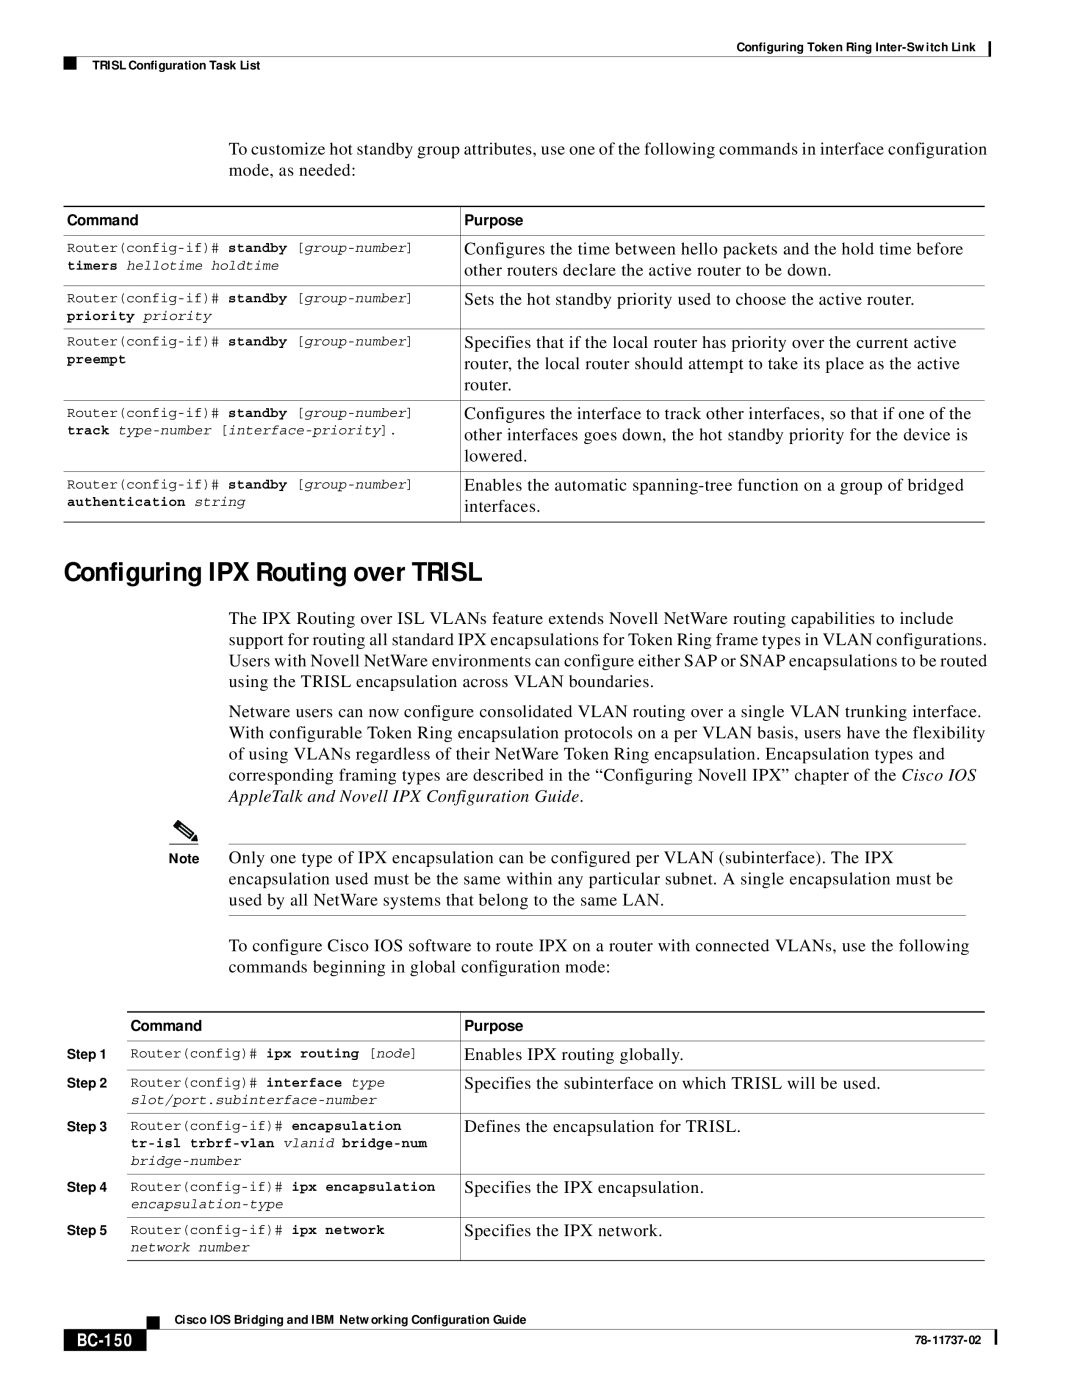 Cisco Systems BC-145 manual Configuring IPX Routing over TRISL, BC-150, Command, Purpose 